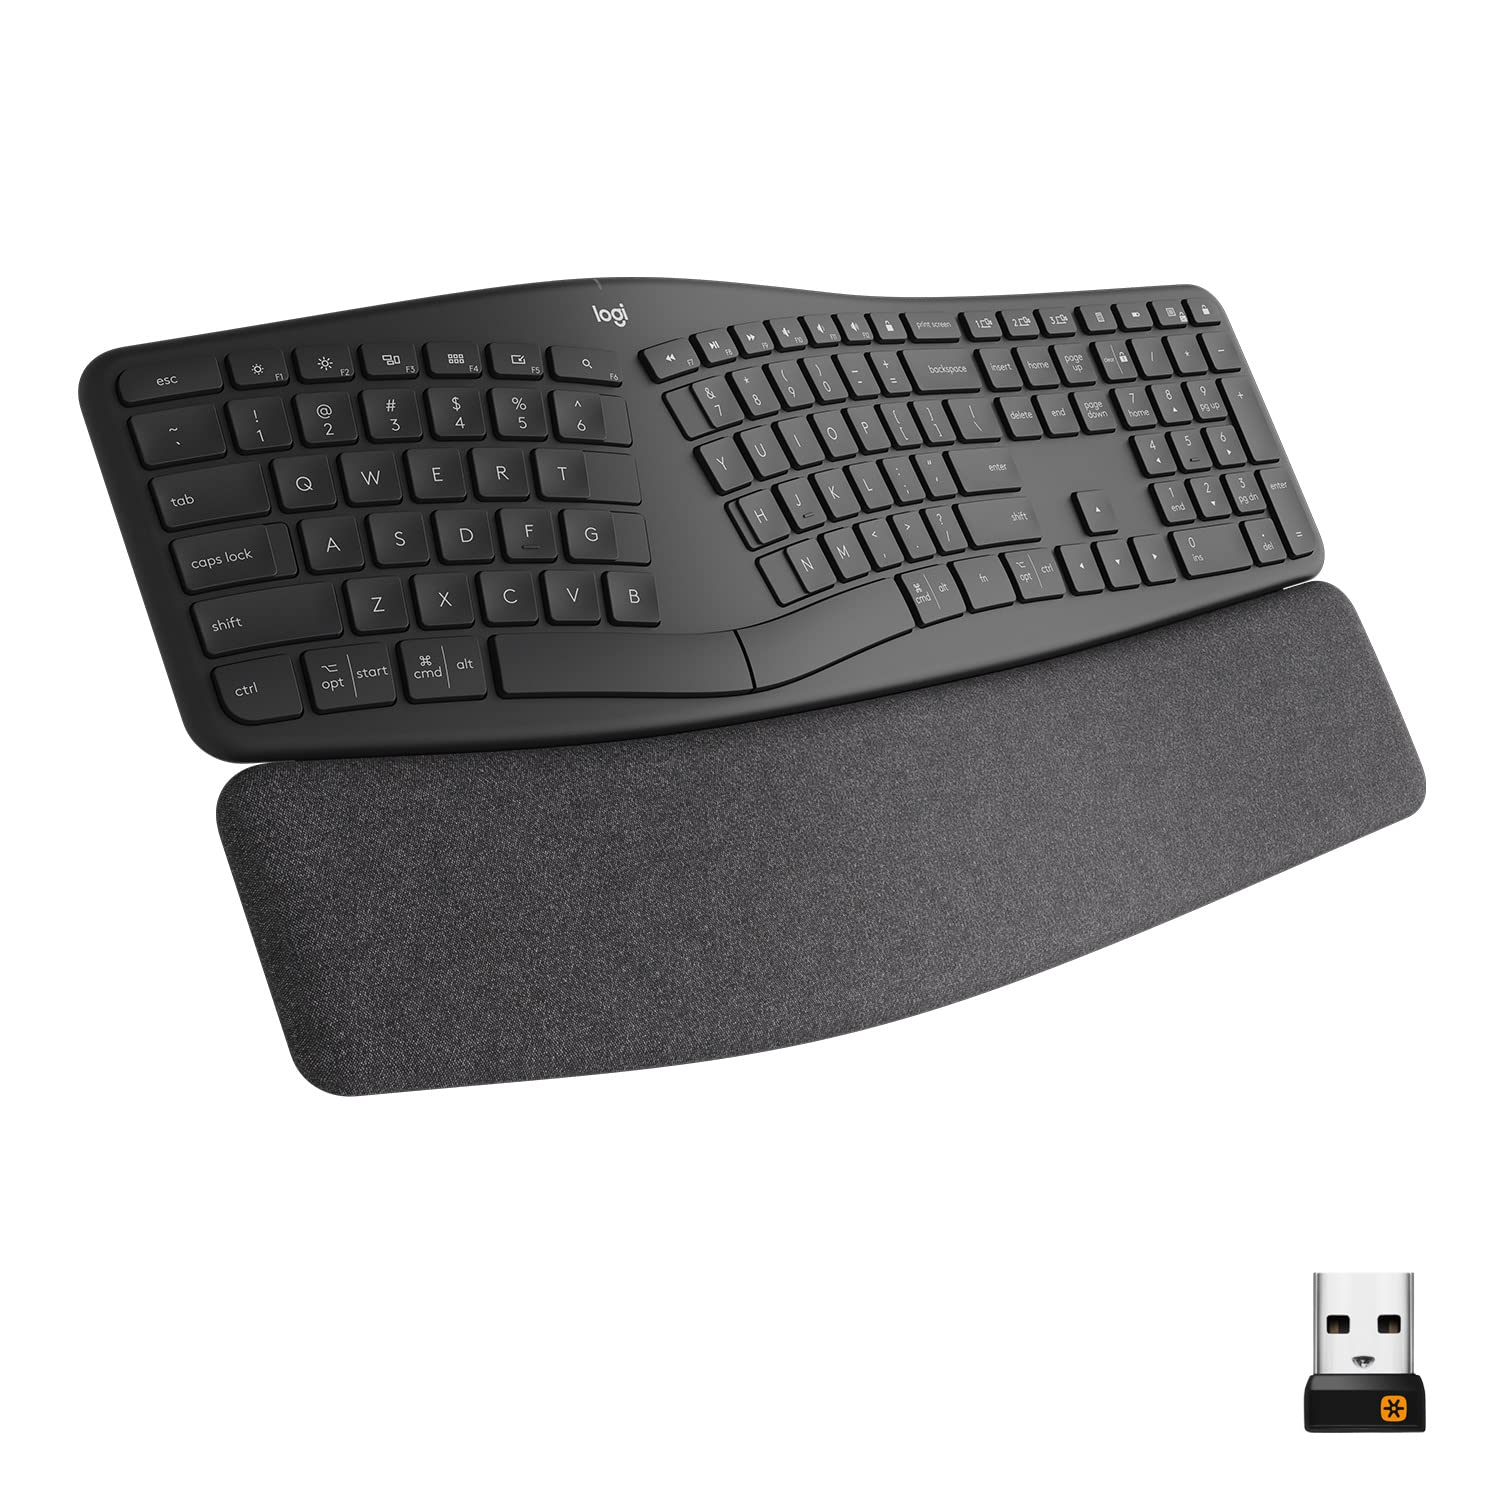 Logitech ERGO K860 Wireless Ergonomic Keyboard - Split Keyboard, Wrist Rest, Natural Typing, Stain-Resistant Fabric, Bluetooth and USB Connectivity,  Only $107.35